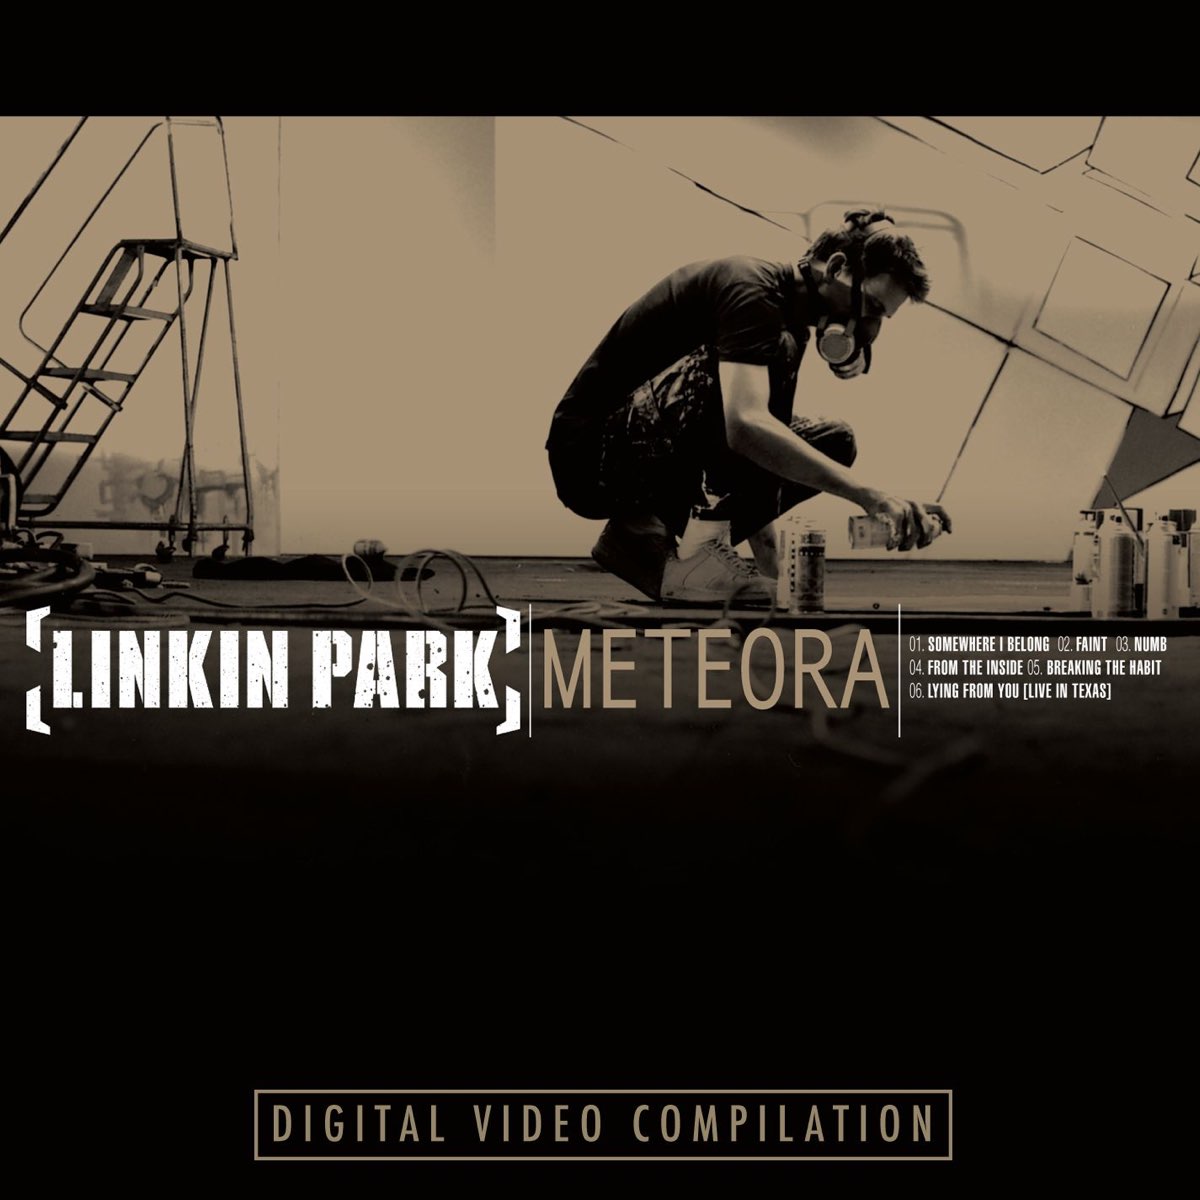 ‎Meteora Digital Video Compilation EP by LINKIN PARK on Apple Music